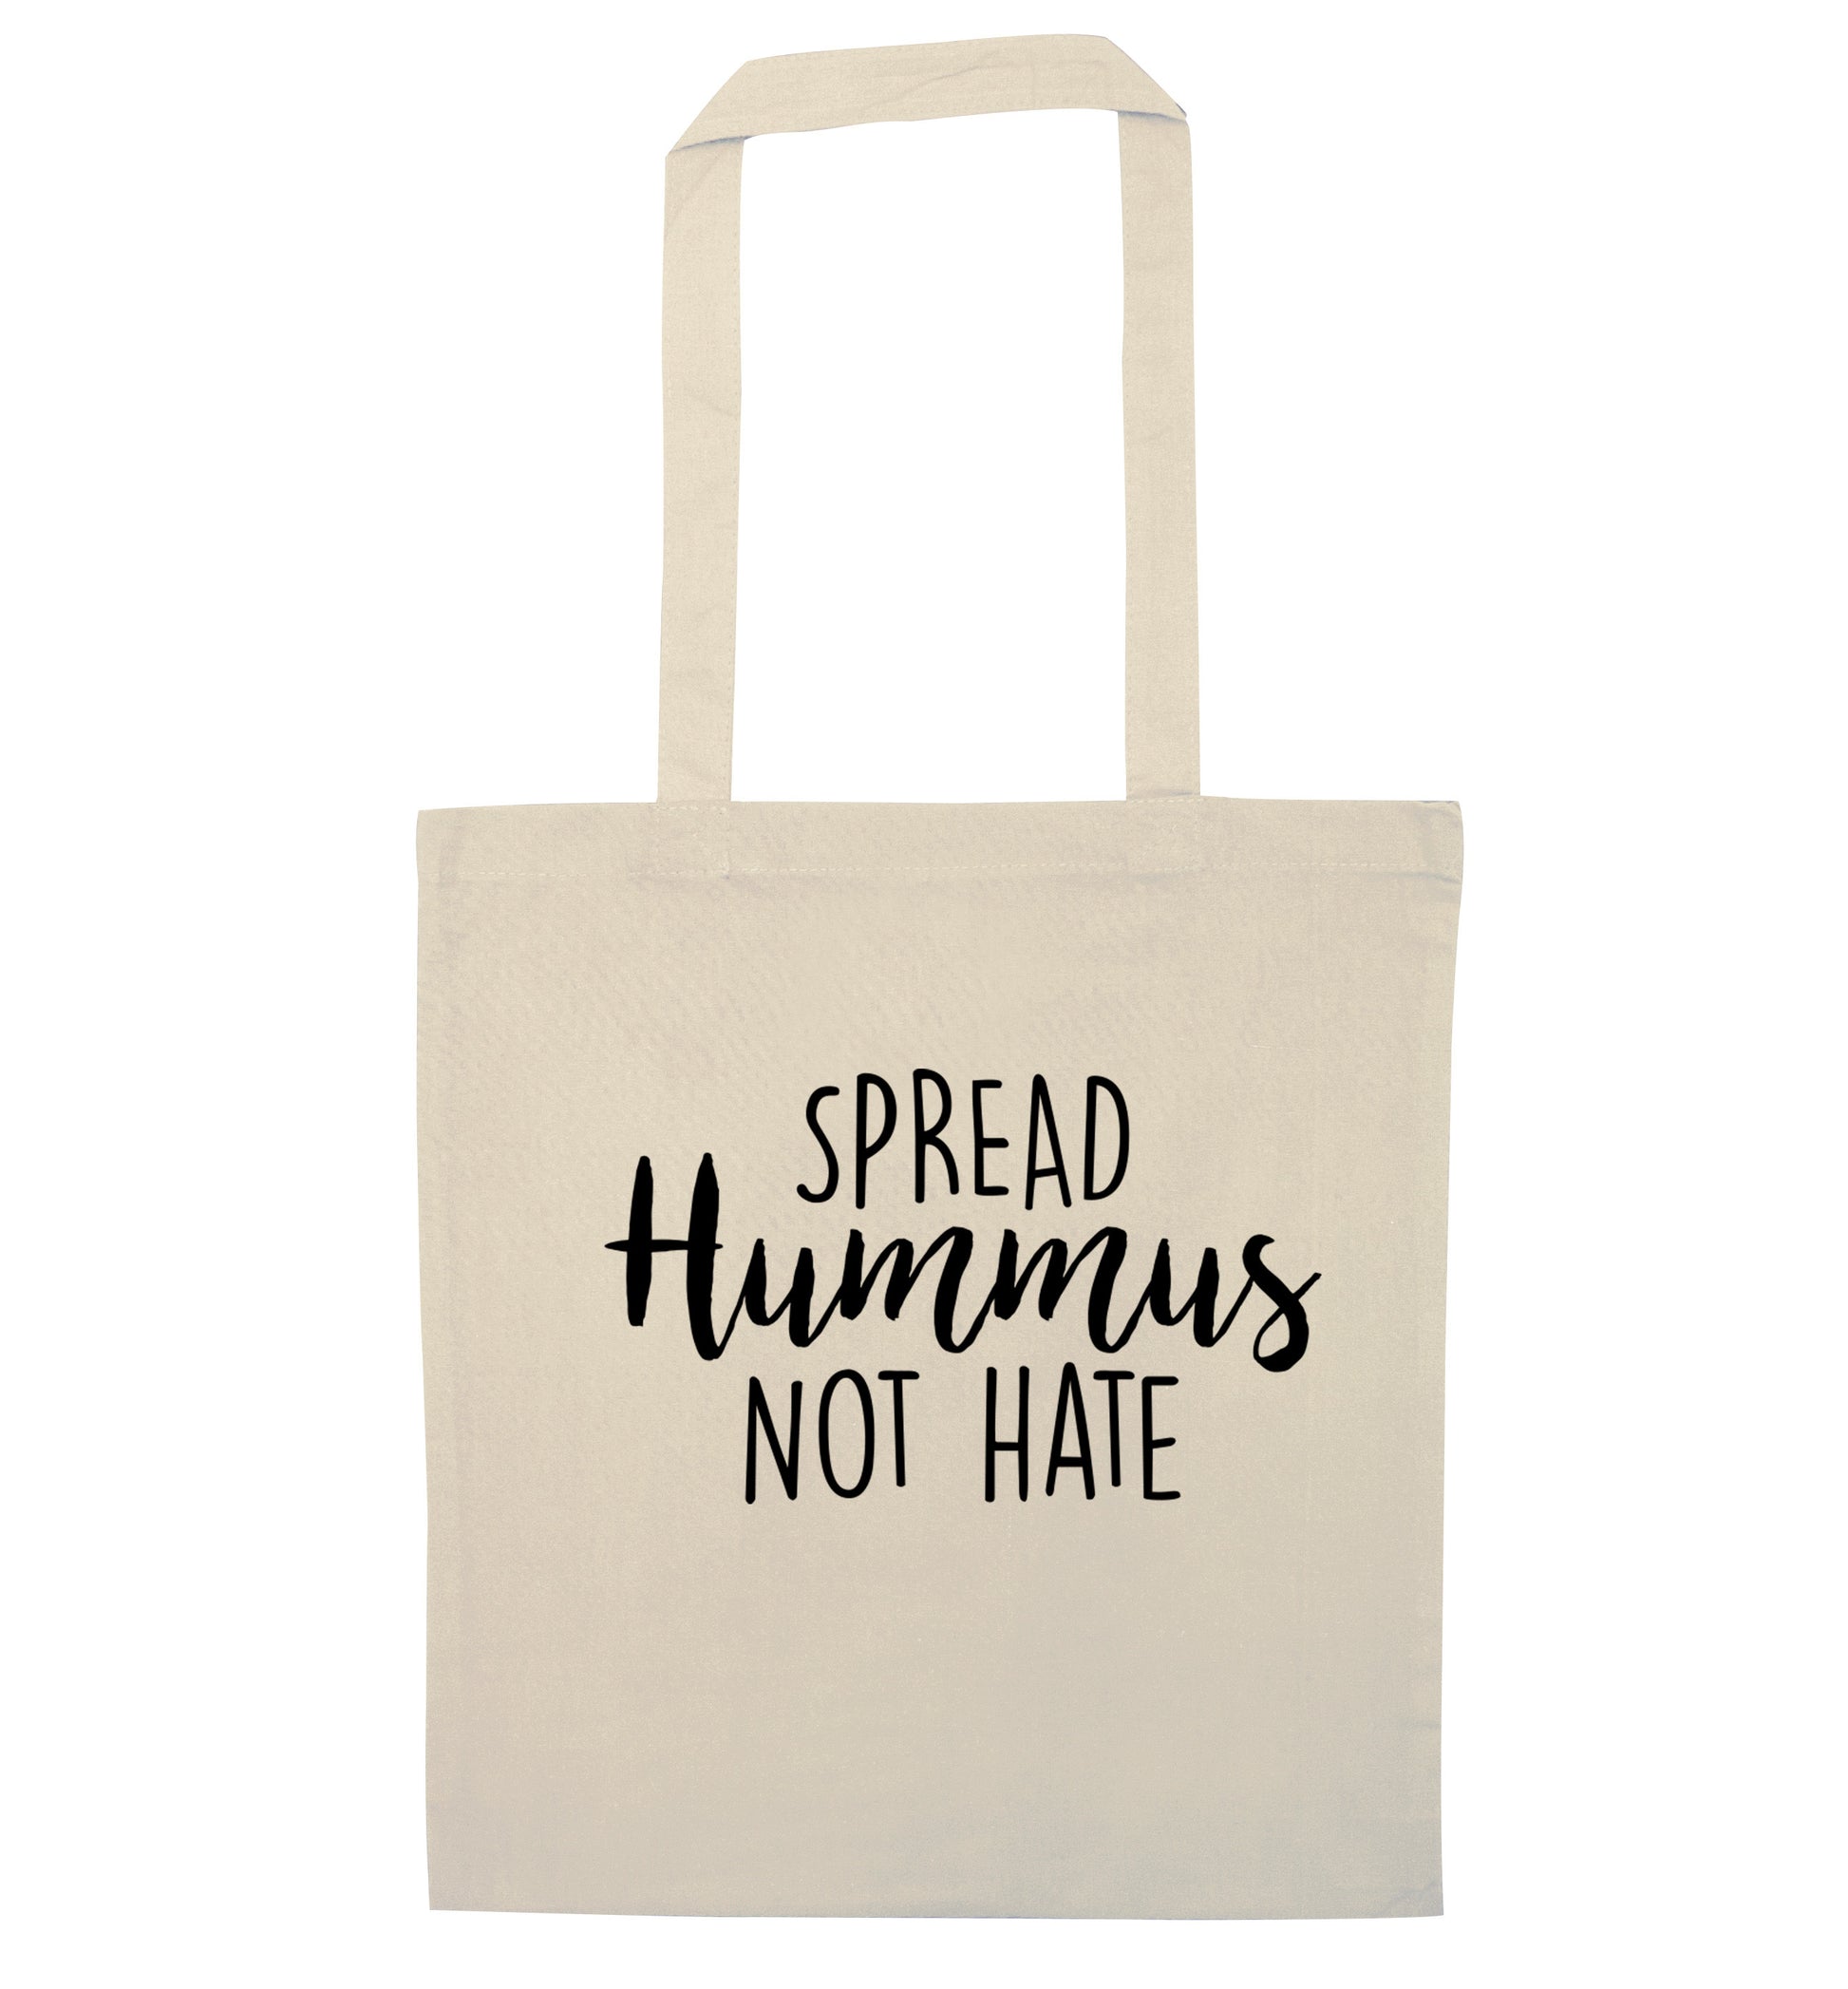 Spread hummus not hate script text natural tote bag